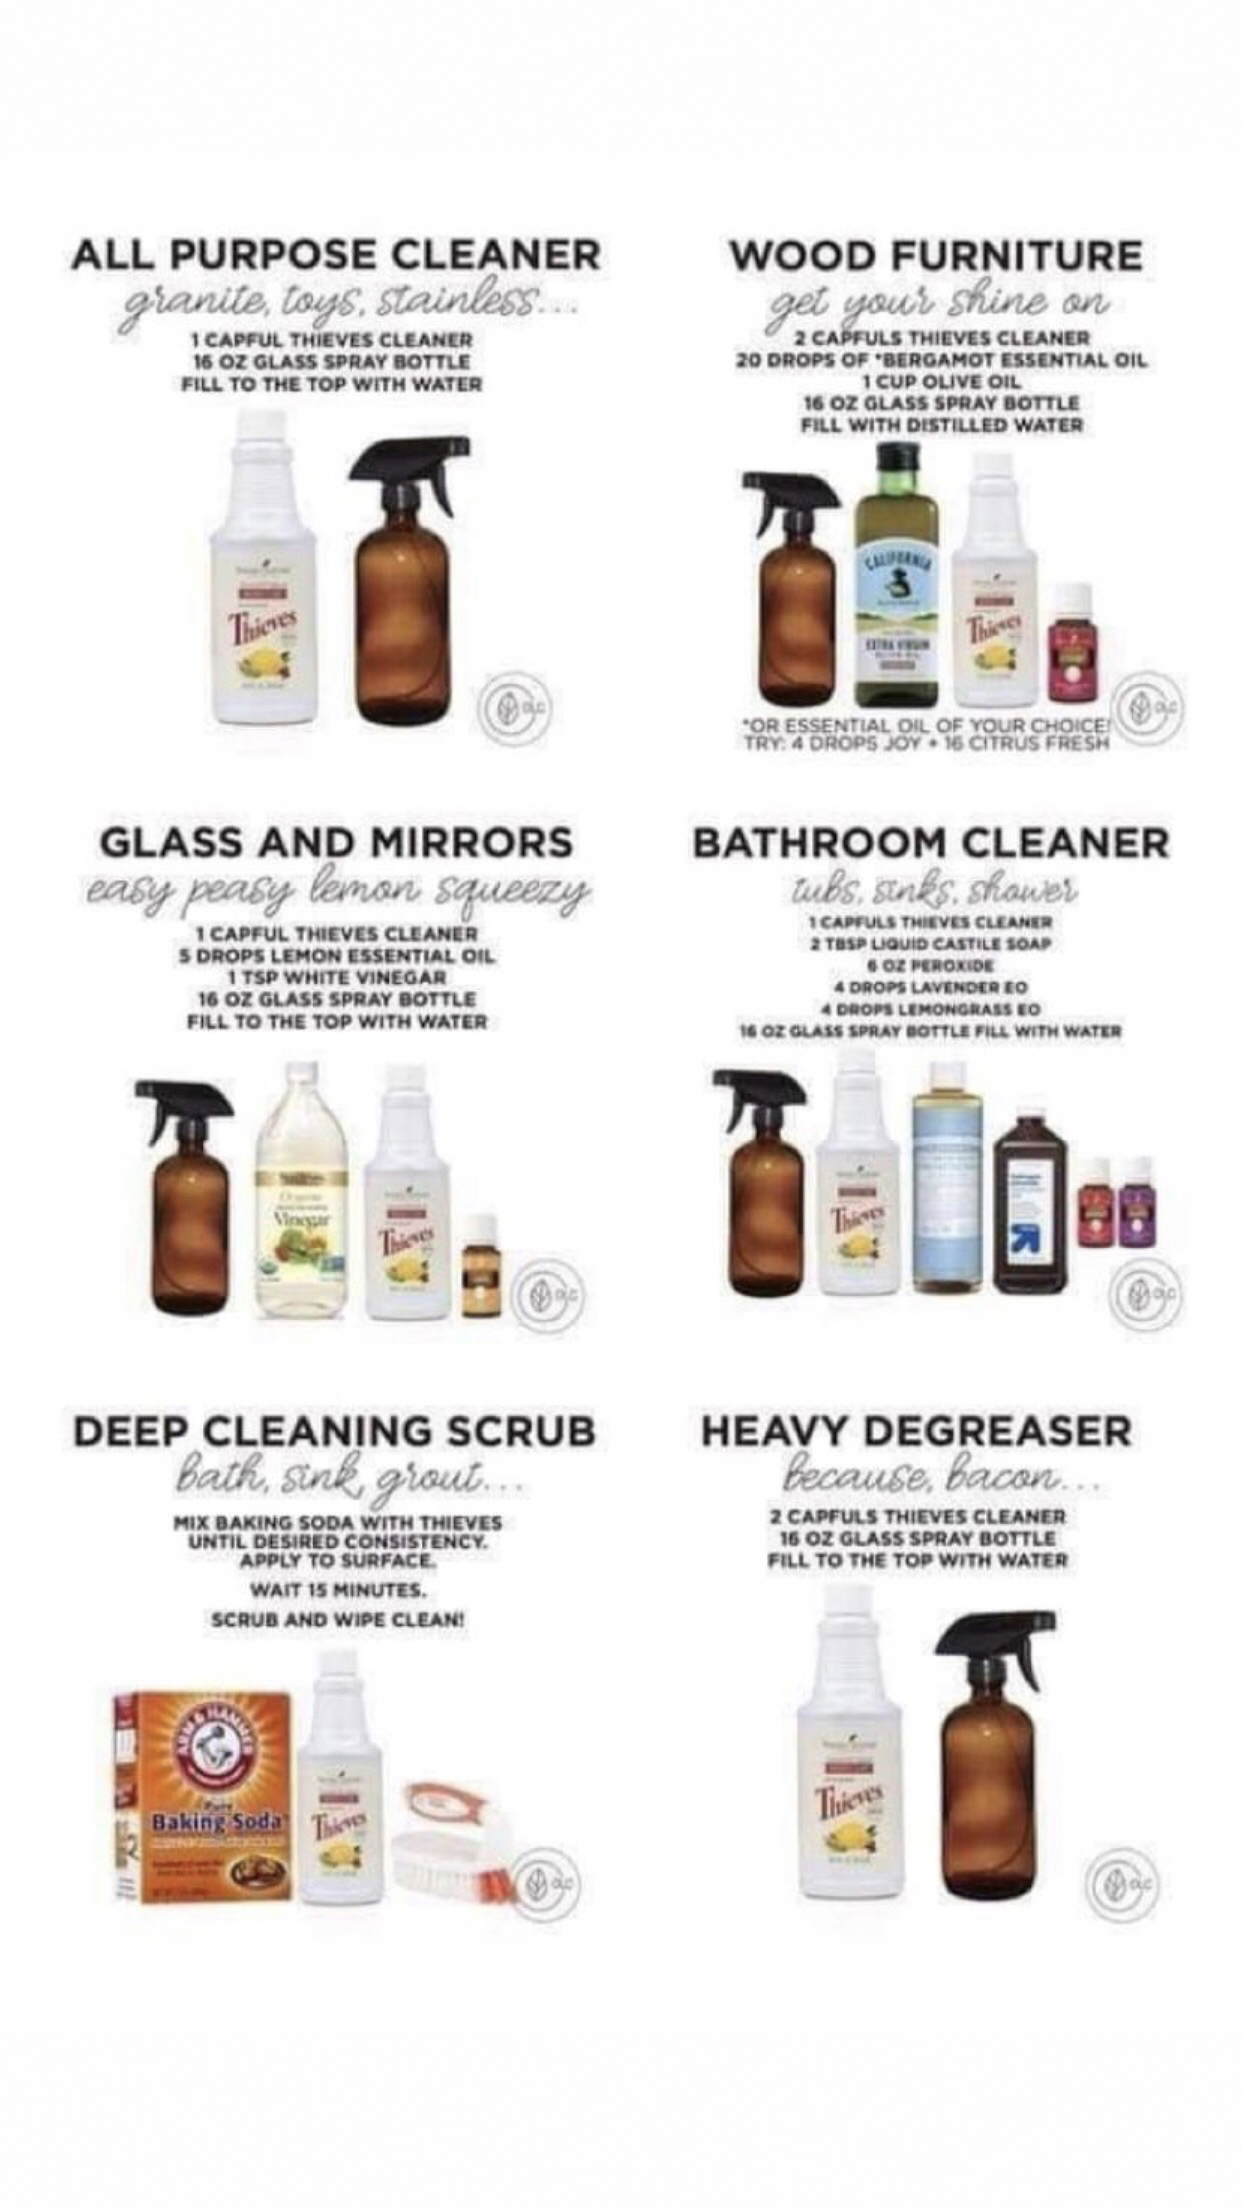 The Best Nontoxic Cleaning Recipes _ 5 Day Plan to Clean Your Whole Home - torey noora.png